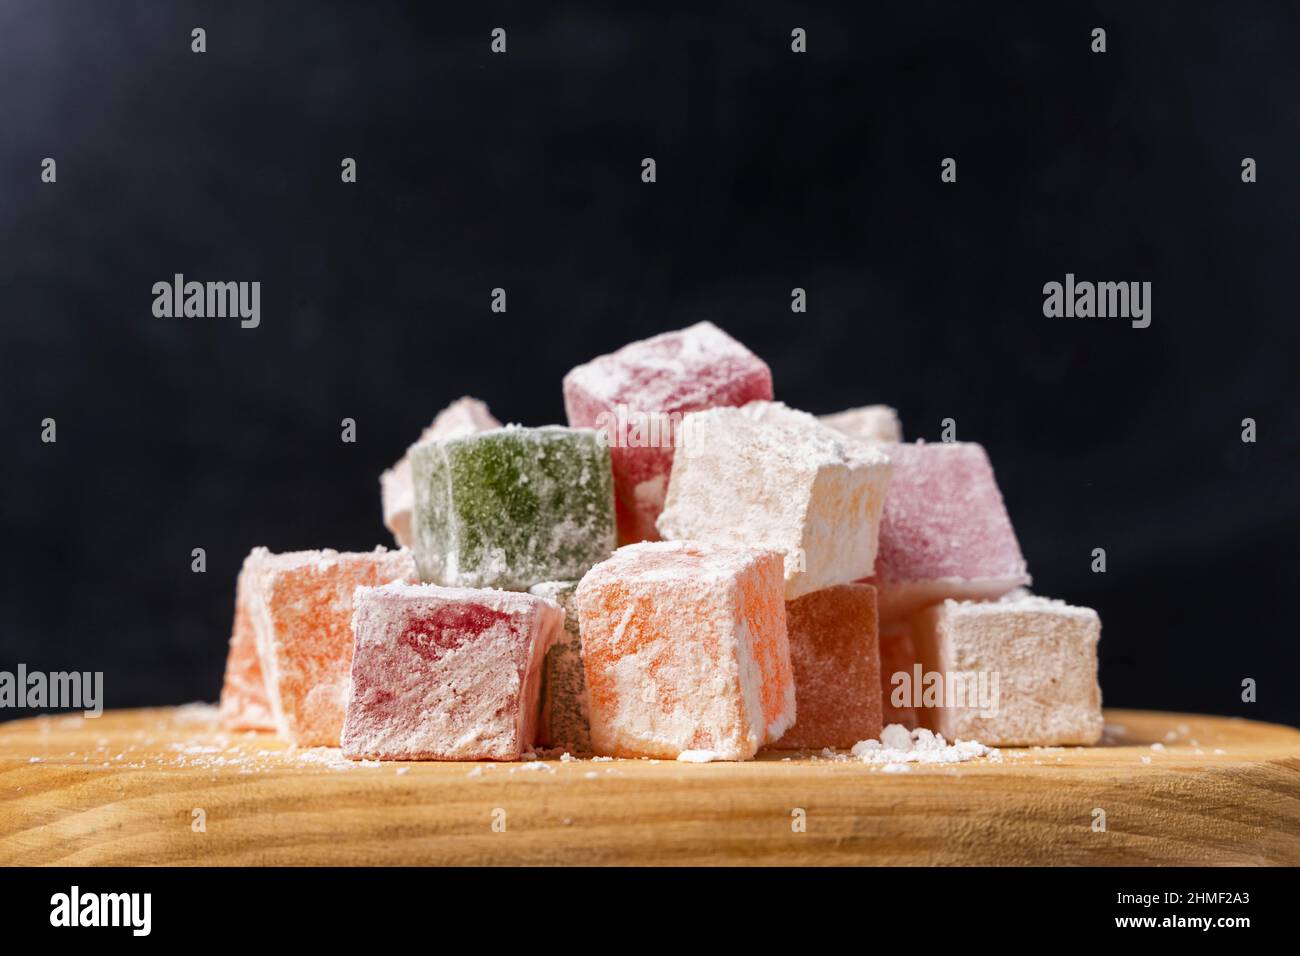 Sweet delicious colored lukum, Turkish delight with powdered sugar on a black background. Delicious natural delicacy, dessert Stock Photo